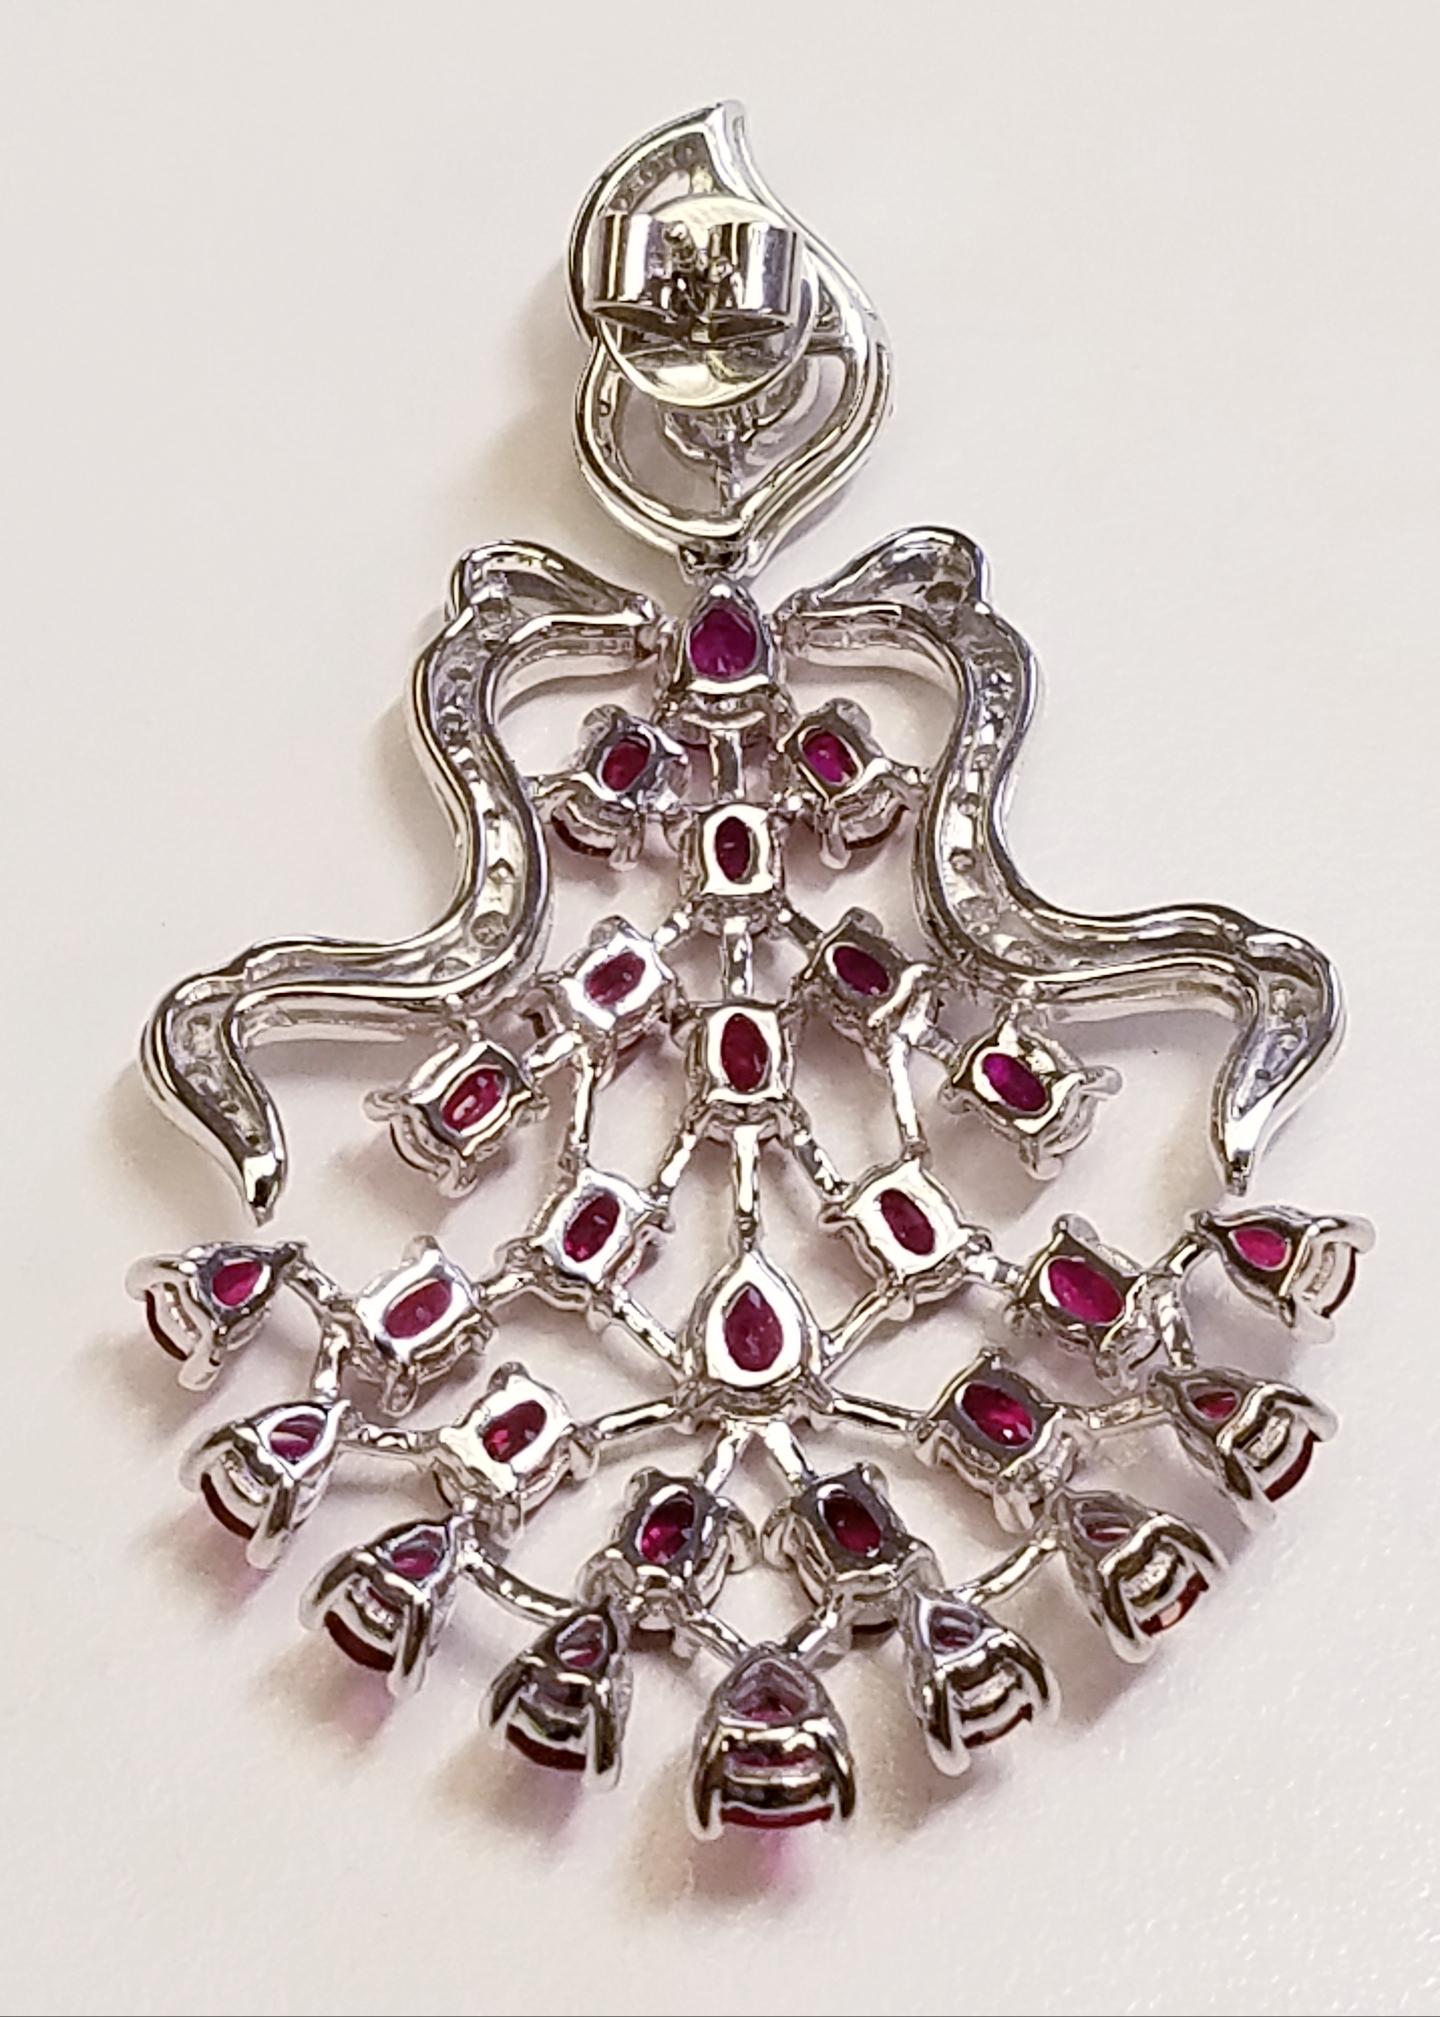 18k White Gold Fancy Ruby and Diamond Earrings 
12.86 Carats of Rubies
1.83 Carats of Diamonds
In this design there is a mix of Oval and Pear Cut Rubies
18 Karat White Gold 